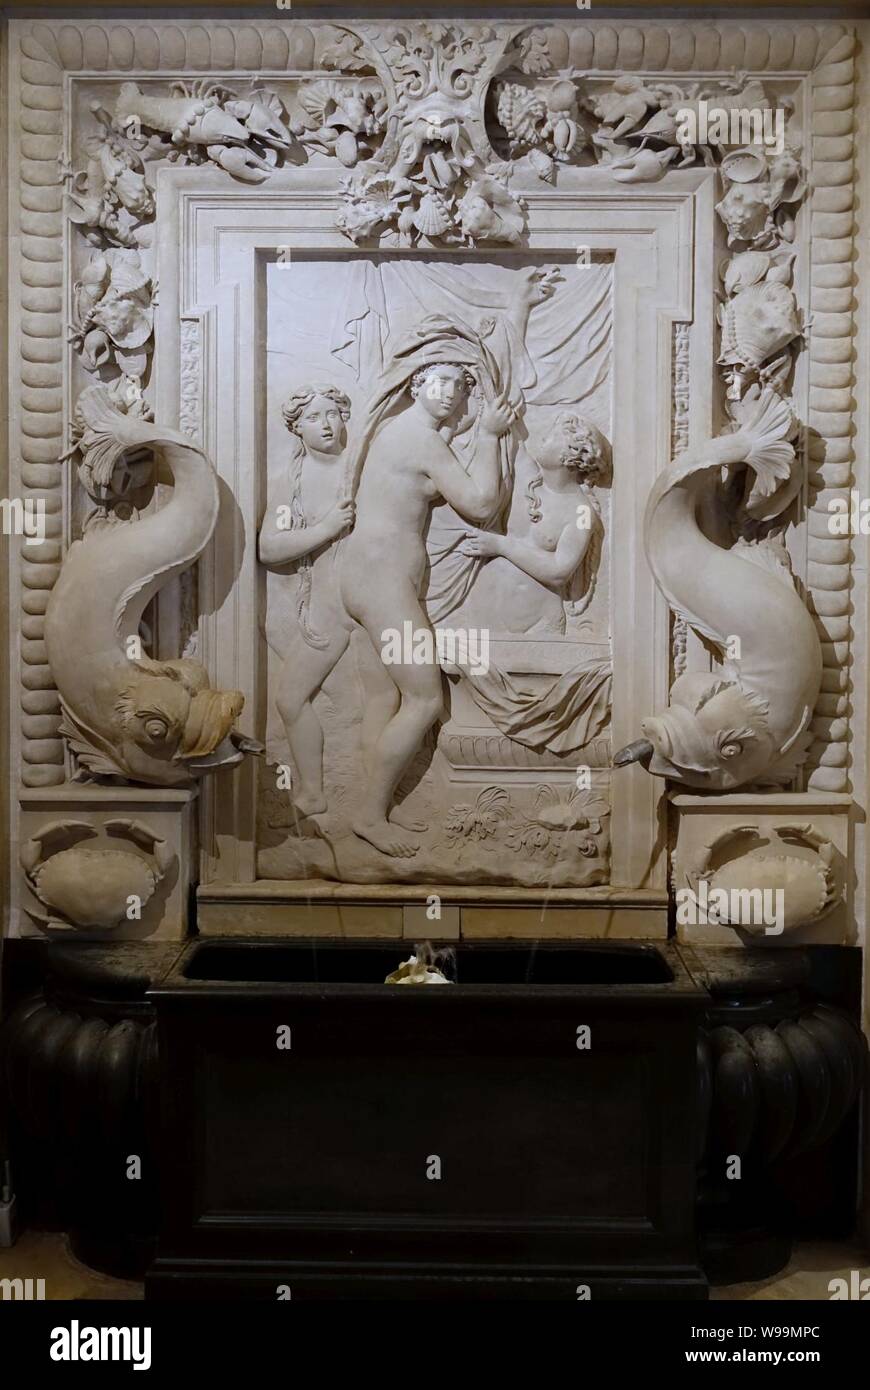 Diana Baden Brunnen Relief, England, Anfang 1600 s, Marmor - Chatsworth House - Derbyshire, England - Stockfoto